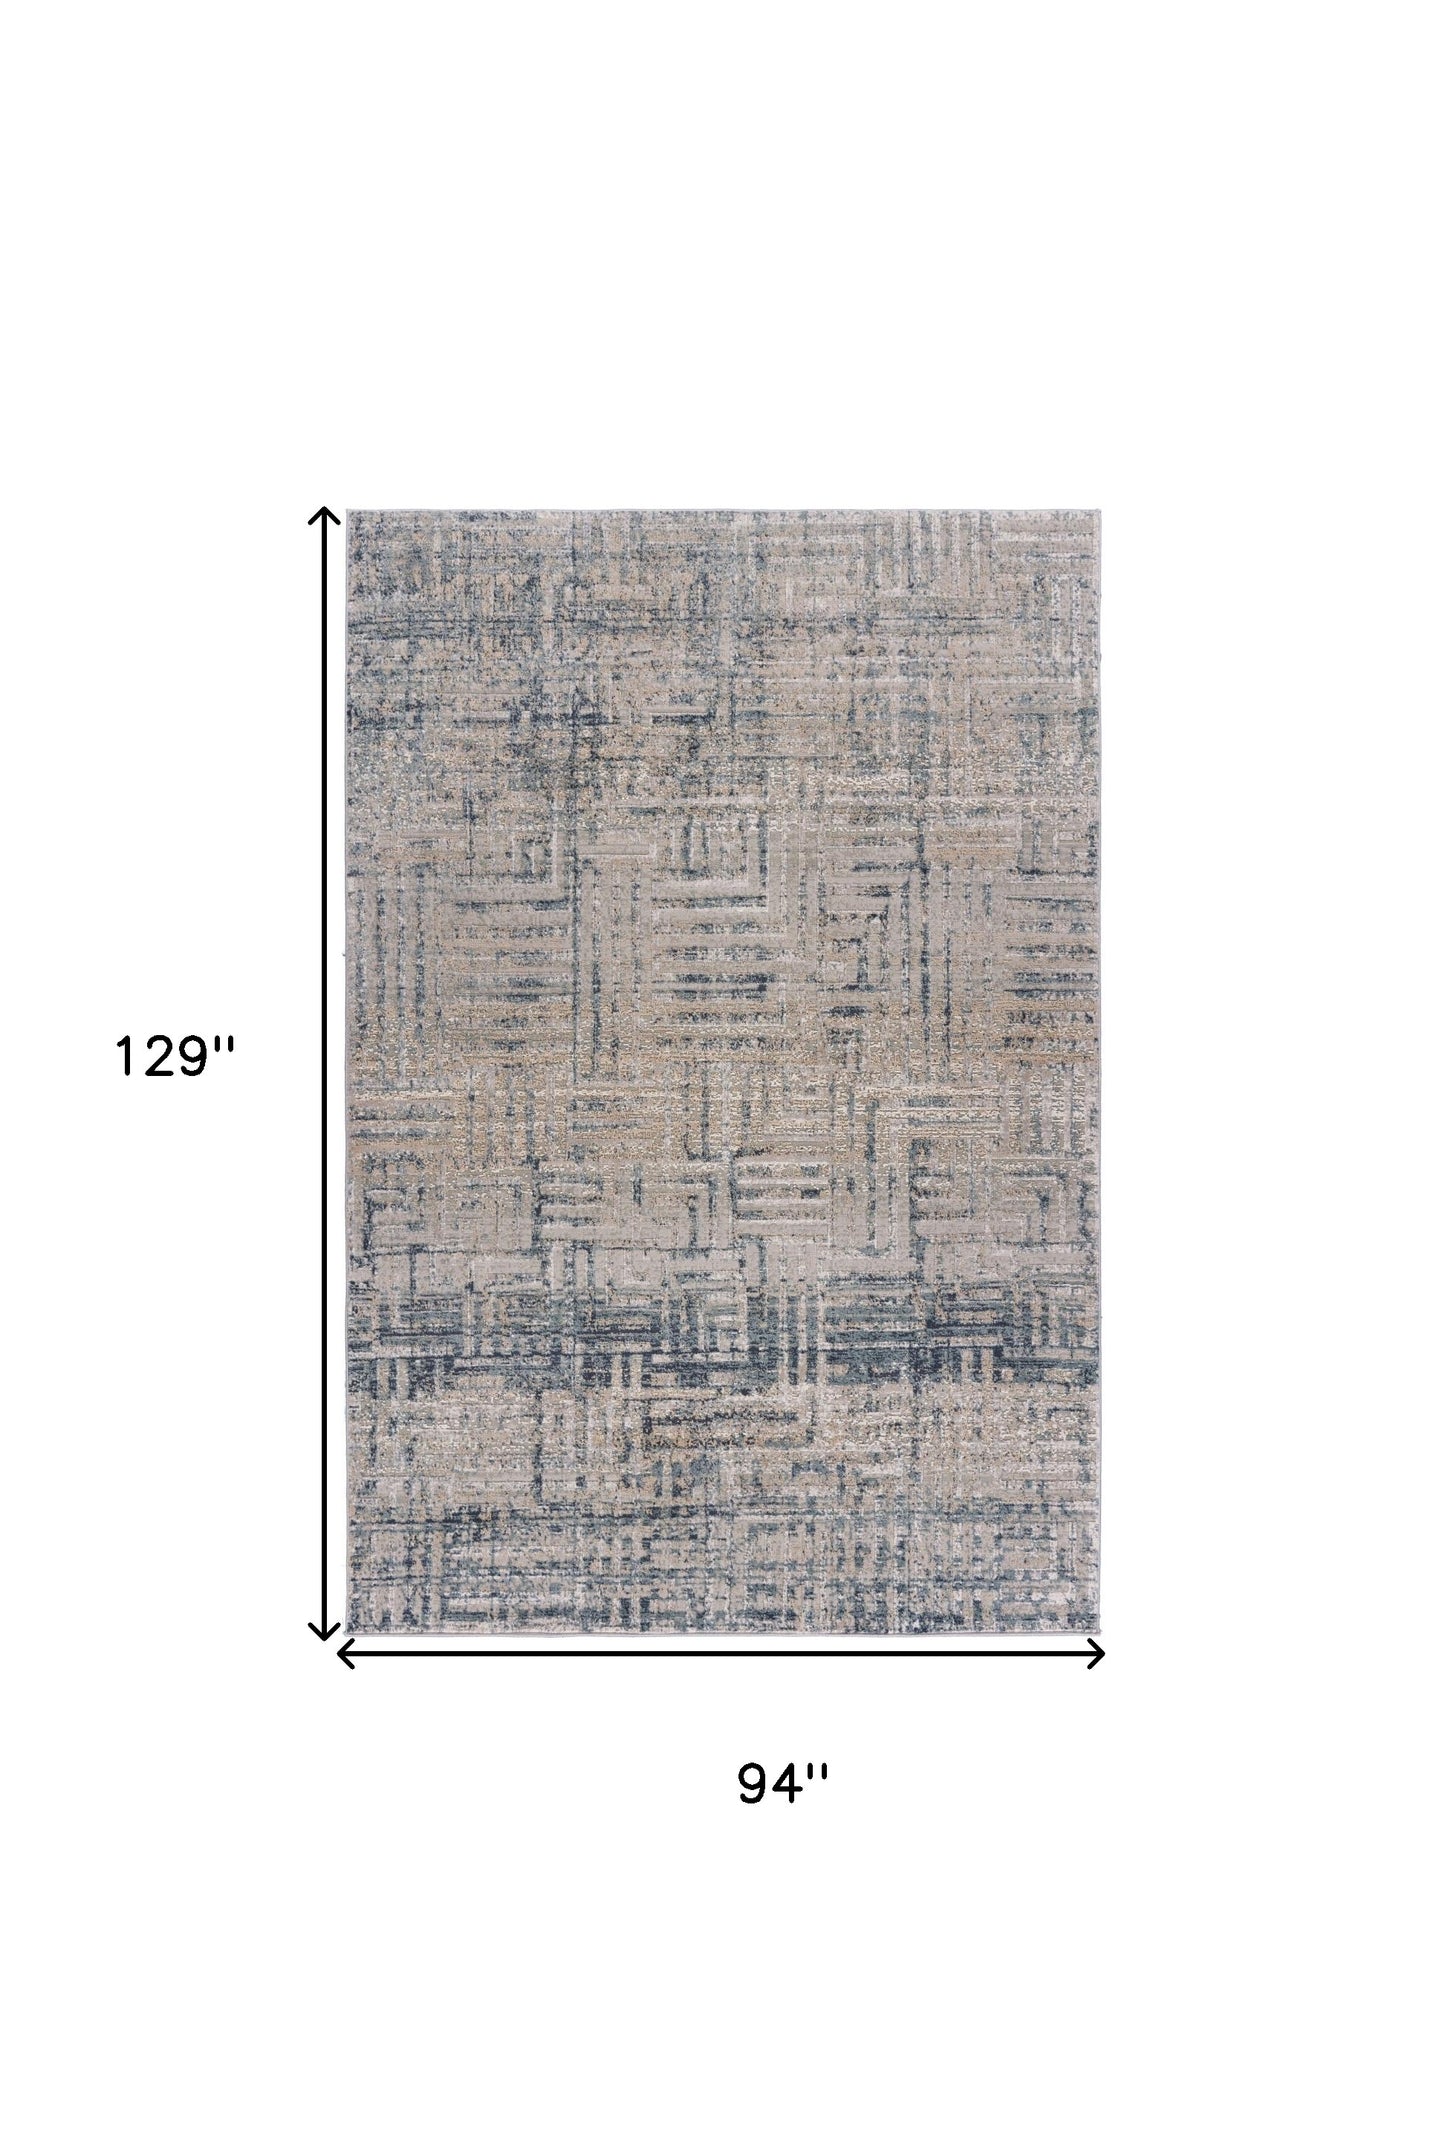 8' X 11' Cream Blue And Ivory Geometric Distressed Stain Resistant Area Rug